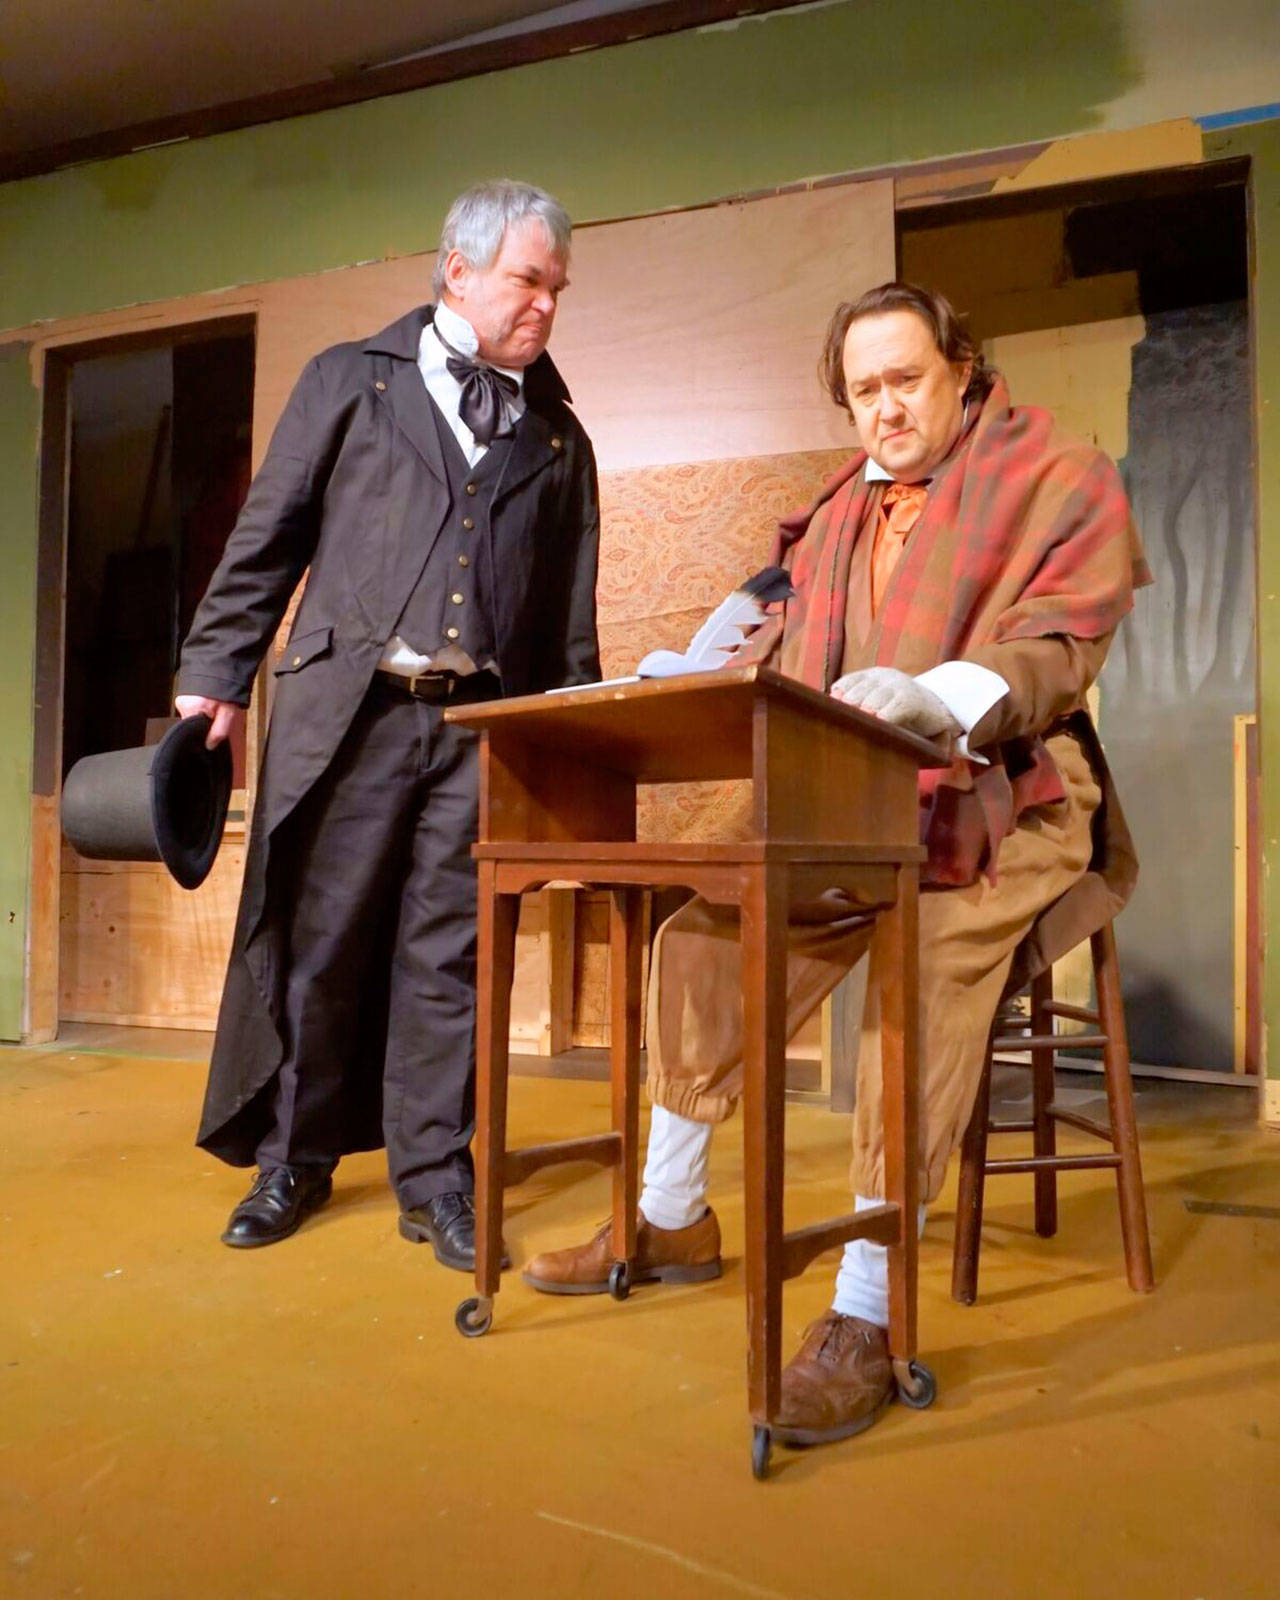 Scrooge, played by Tim Platt, reprimanding Bob Cratchit, played by Michael Murdock, when he asked for Christmas day off. (Courtesy Photo)